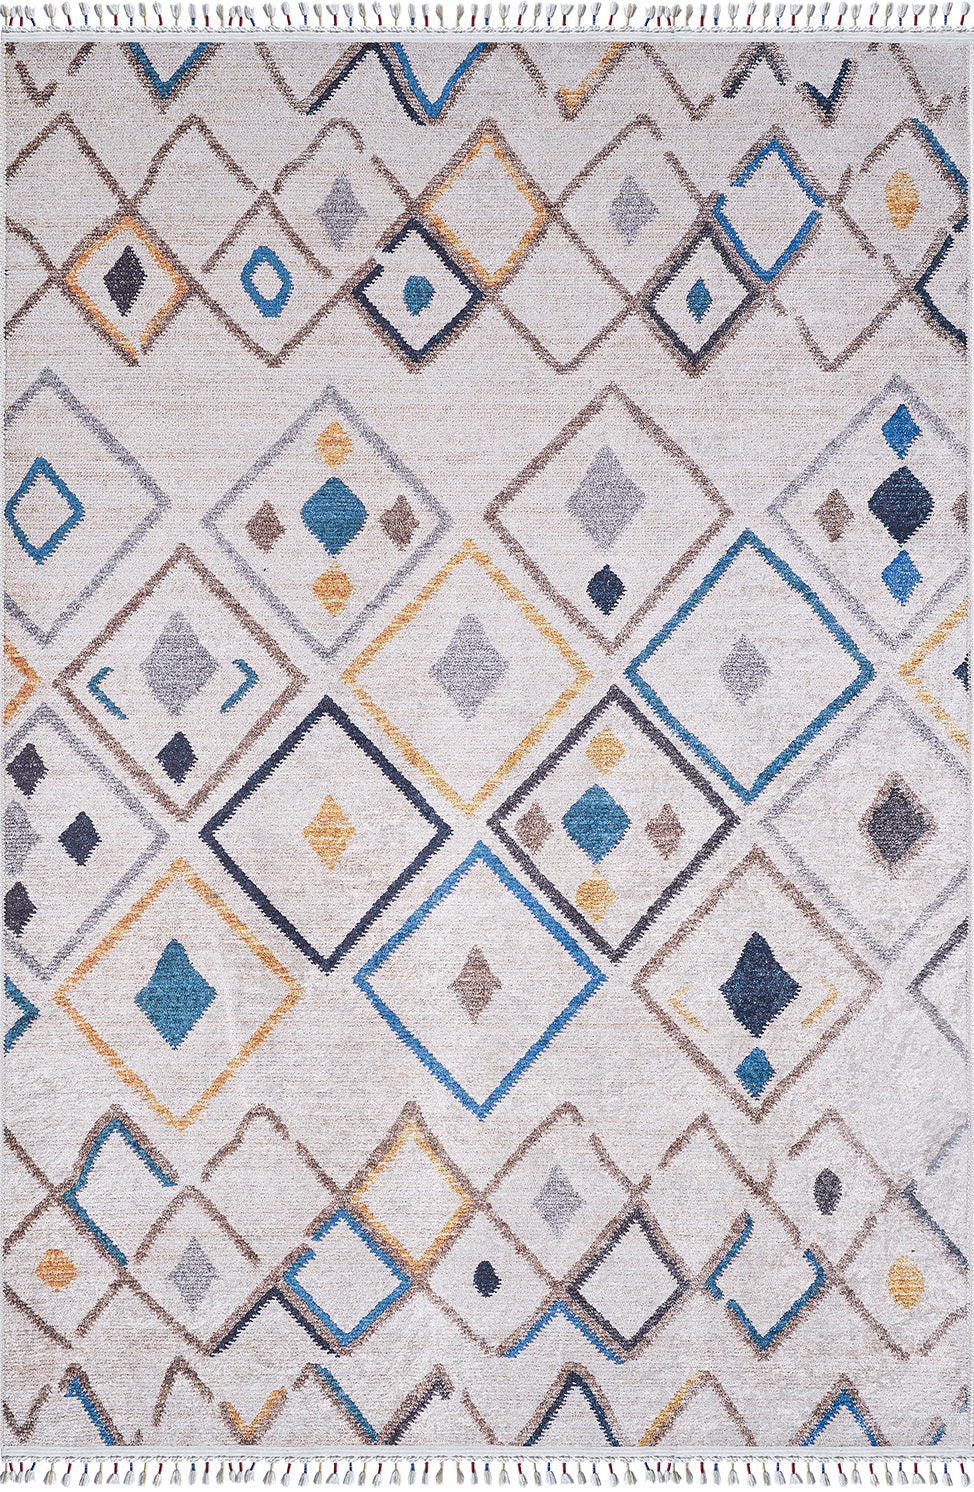 machine-washable-area-rug-Braided-Tassel-Collection-Blue-Yellow-Gold-Gray-Anthracite-JR5016